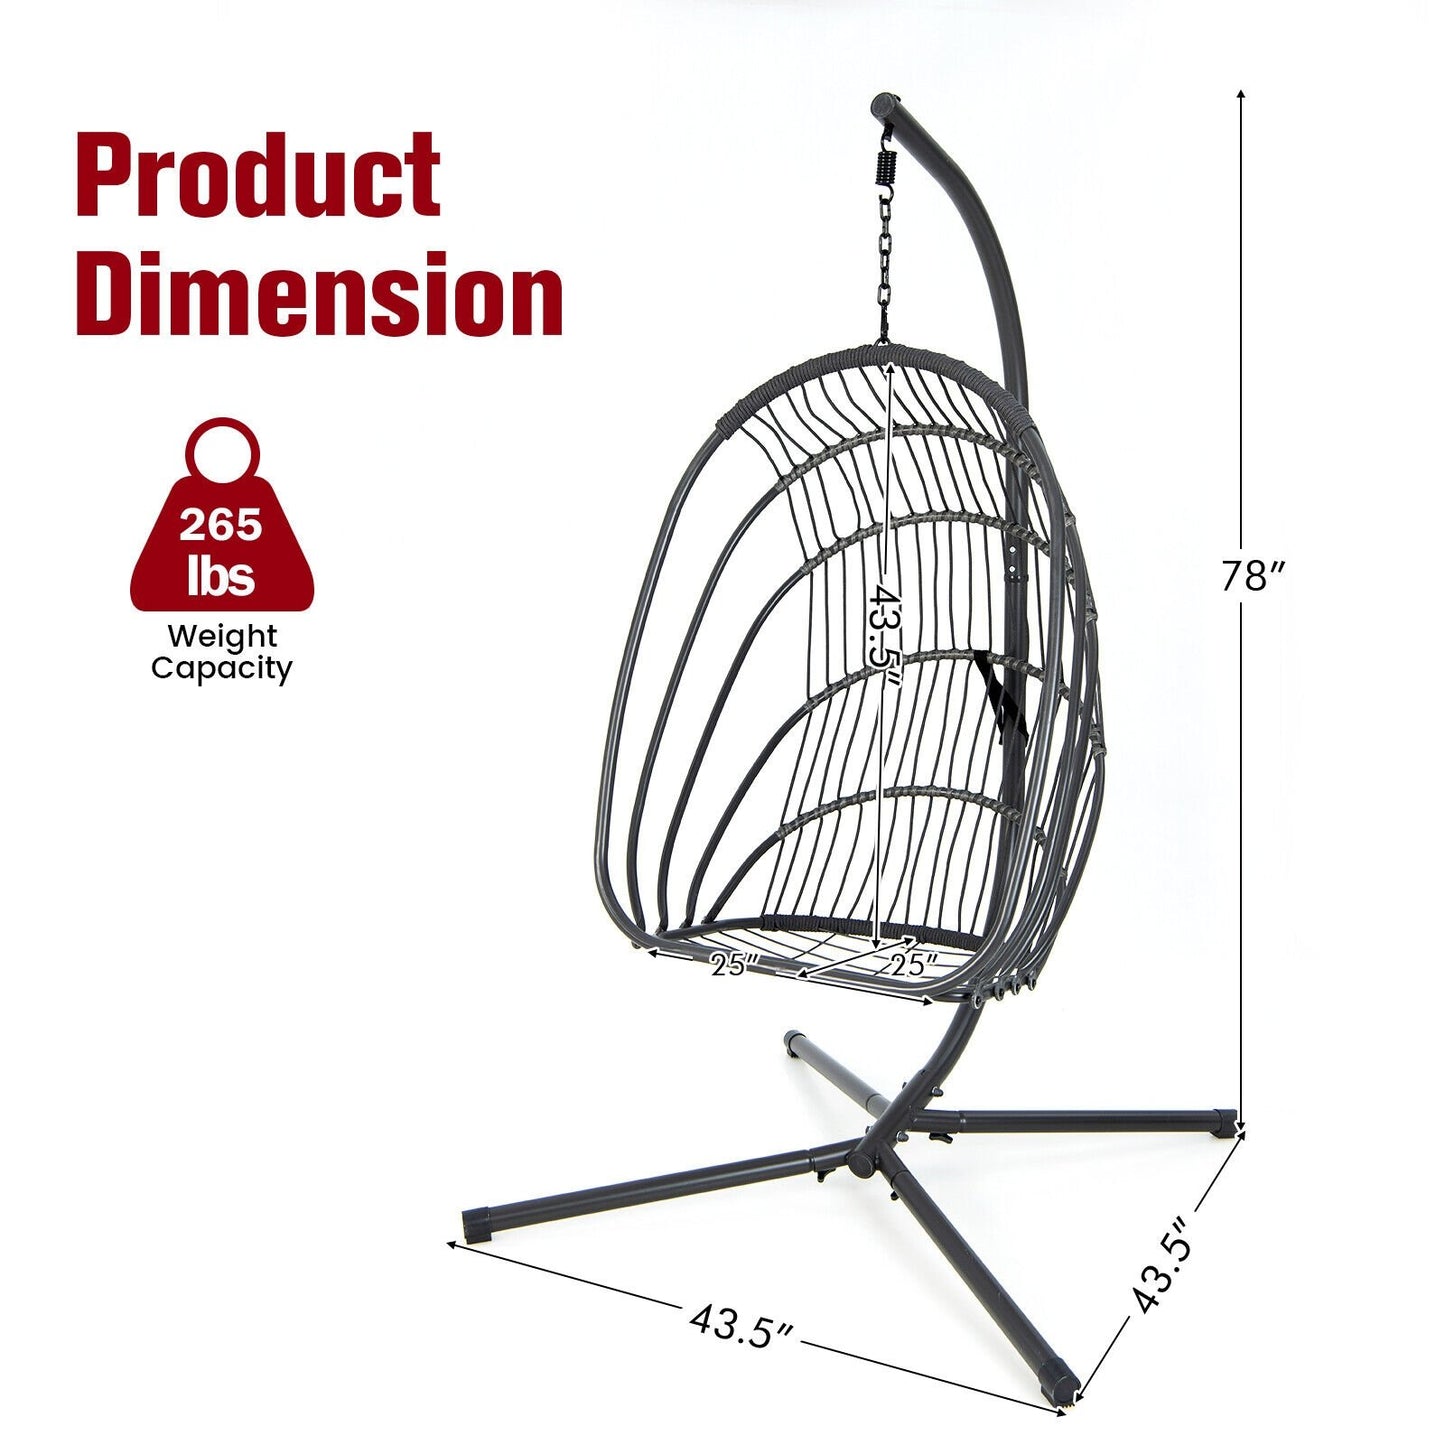 Hanging Folding Egg Chair with Stand Soft Cushion Pillow Swing Hammock, Red